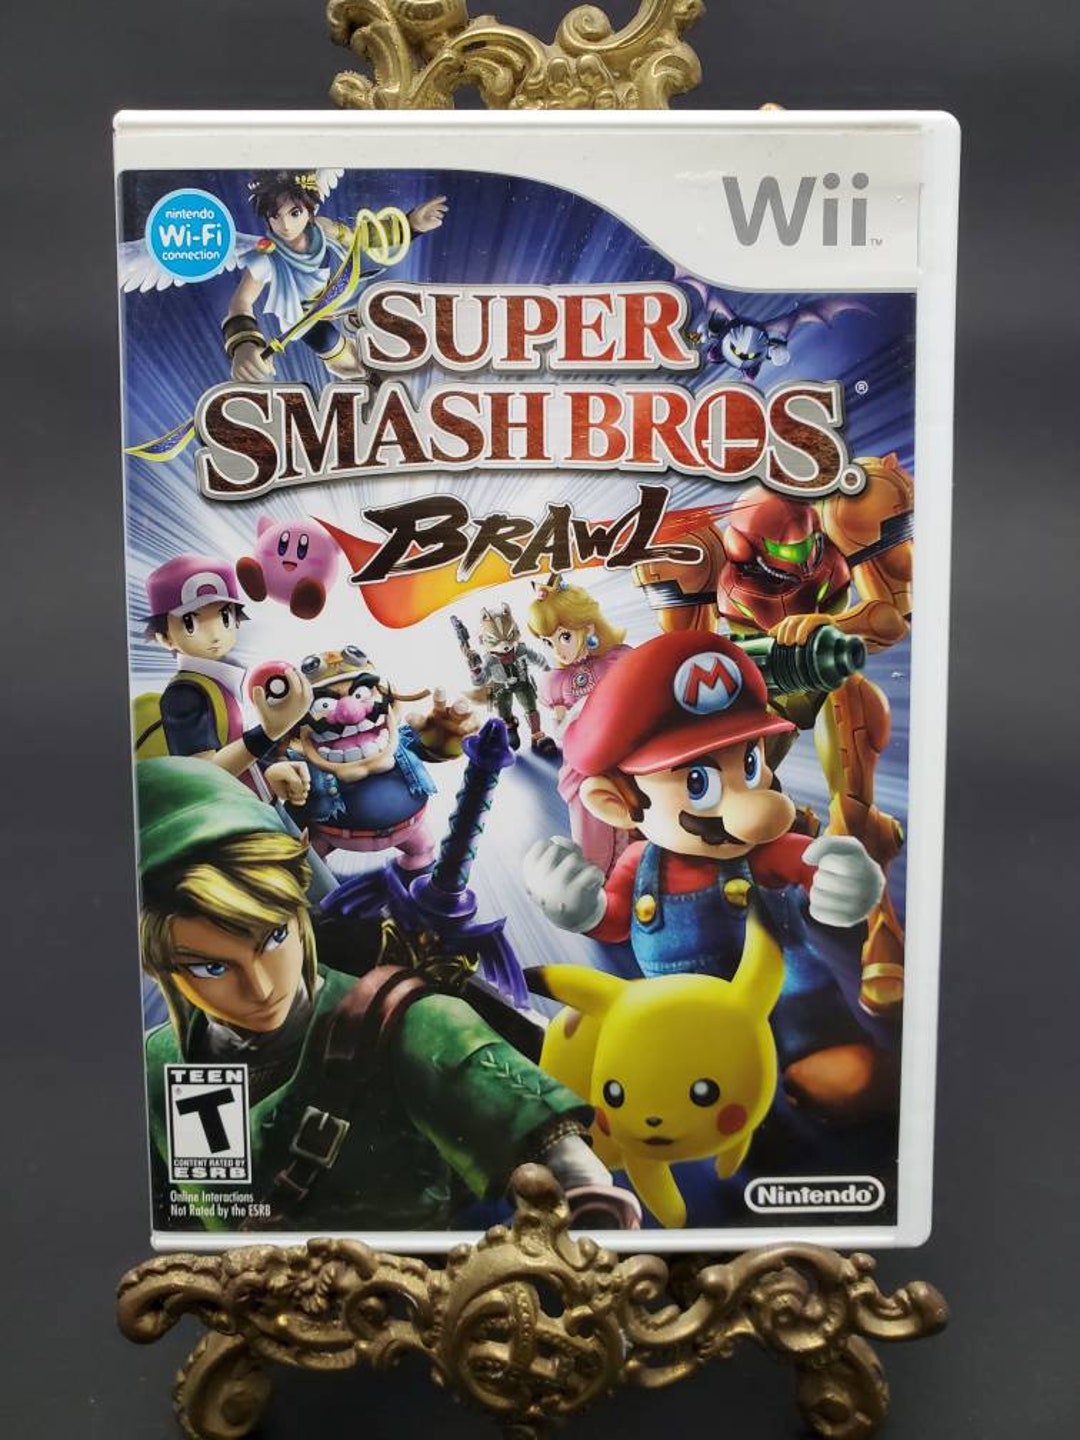 Wii Game lot: Super Smash Bros. Brawl, Go Vacation, and CRUIS'N. VG+